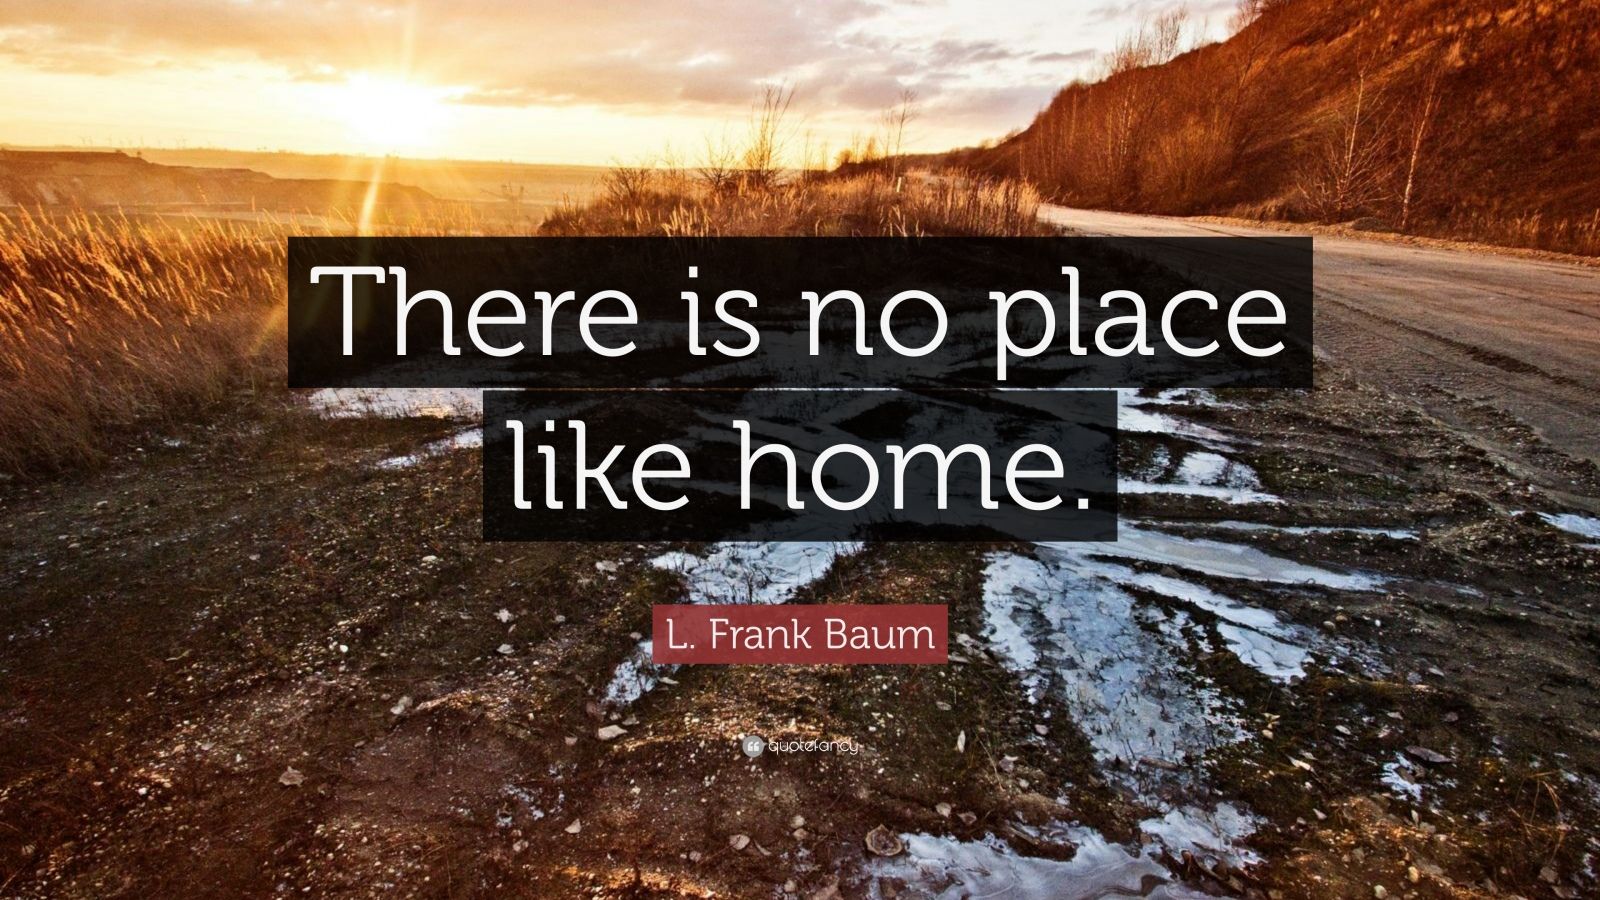 L. Frank Baum Quote “There is no place like home.” (7 wallpapers